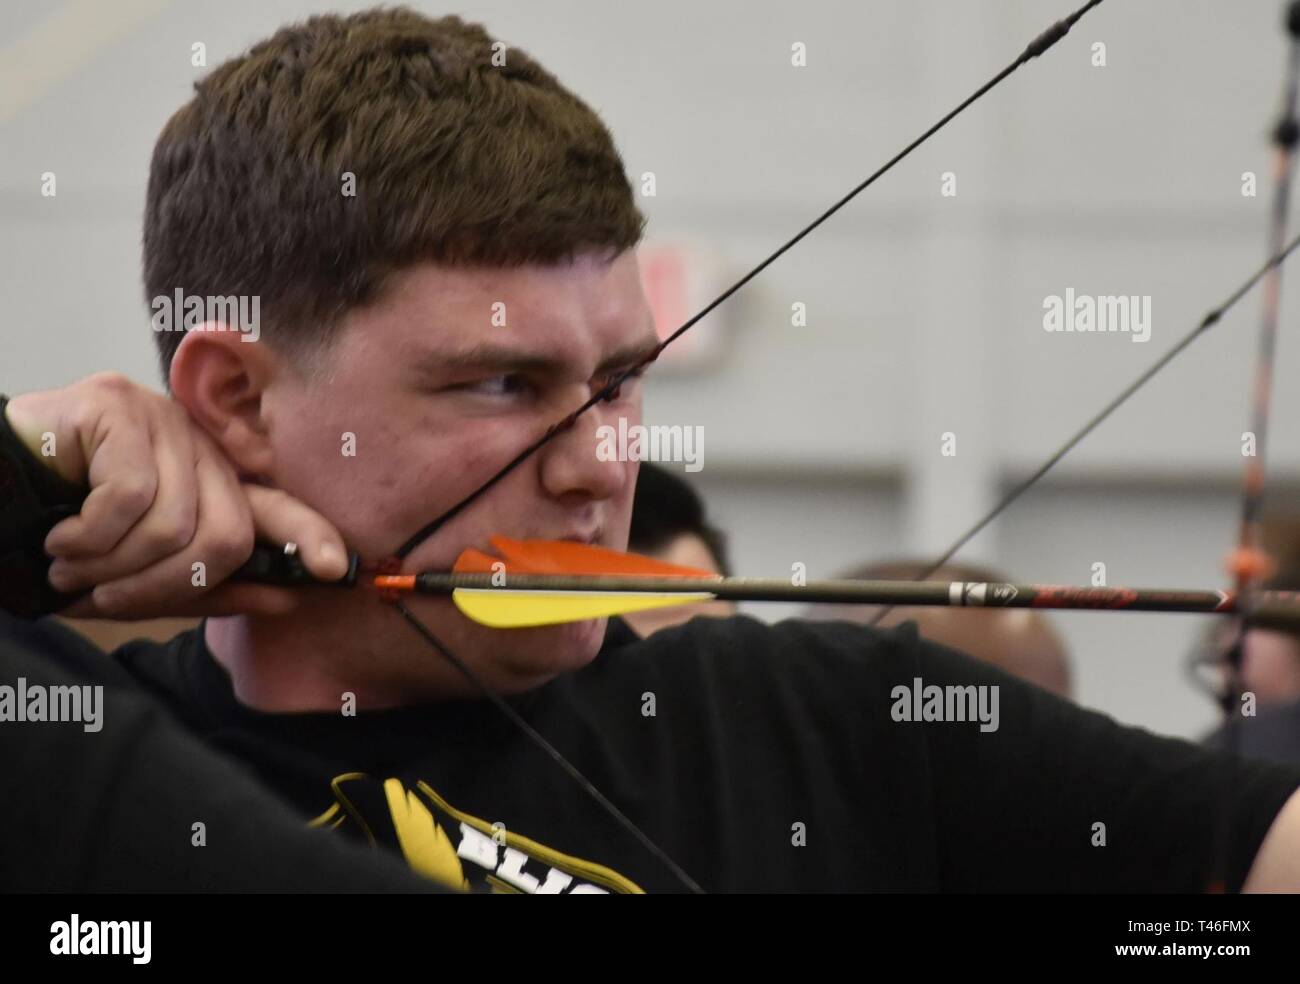 Staff Sgt. Kohl McLeod, a wounded warrior athlete from Fort Benning gets ready to shoot a bow at archery practice during the 2019 Army Trials, Mar. 8. The 2019 Army Trials at Fort Bliss, Texas is an adaptive sports competition from Mar. 5-16 with over 100 wounded, ill and injured active-duty Soldiers and veterans competing in 14 different sports for the opportunity to represent Team Army at the 2019 Department of Defense Warrior Games in Tampa, Florida. Stock Photo